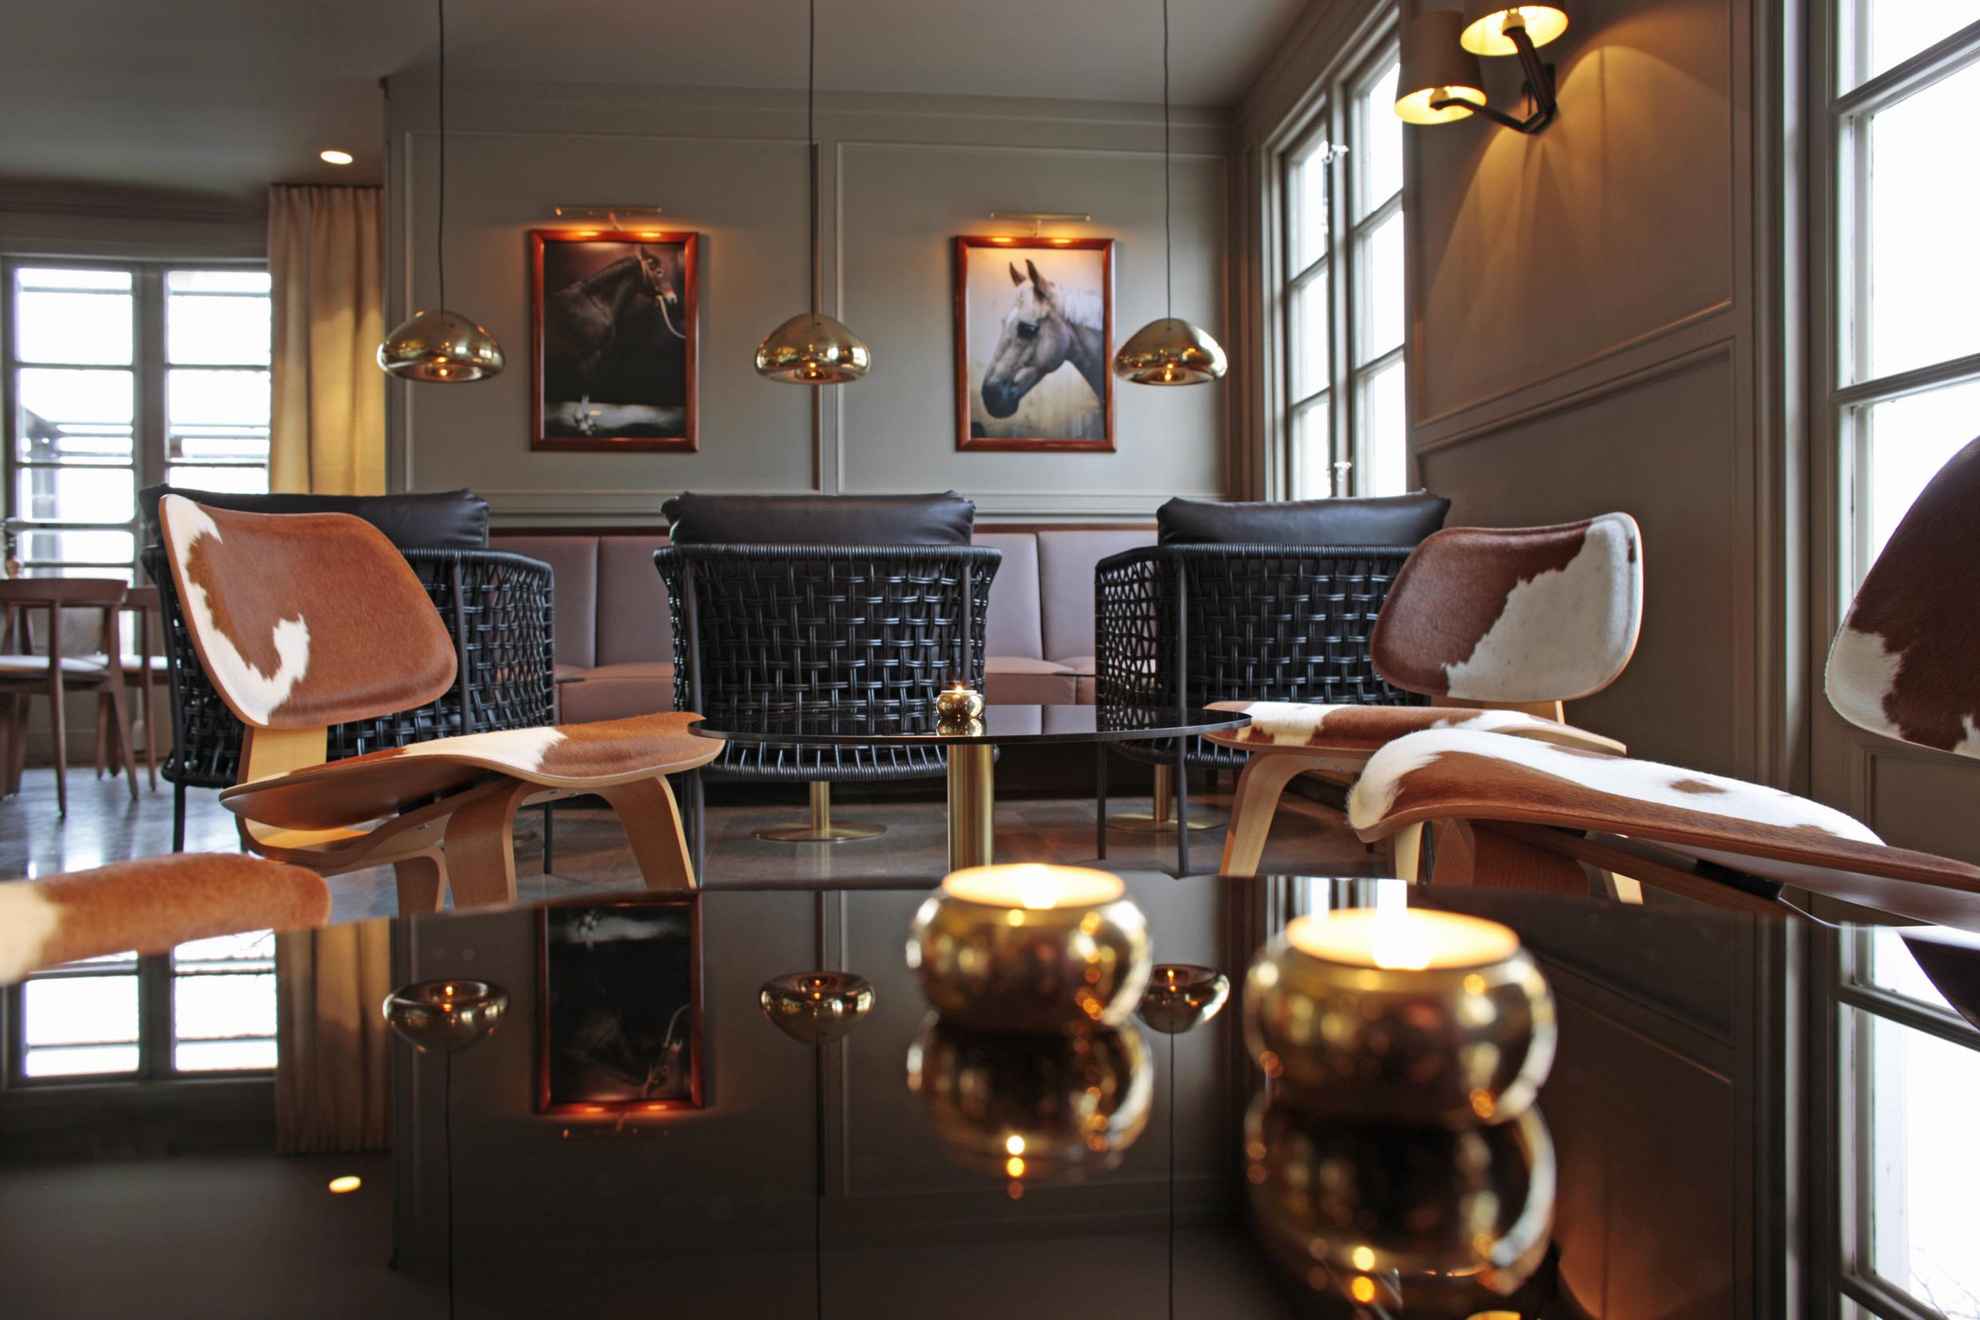 A lounge area in a hotel is decorated with furniture in warm copper tones.